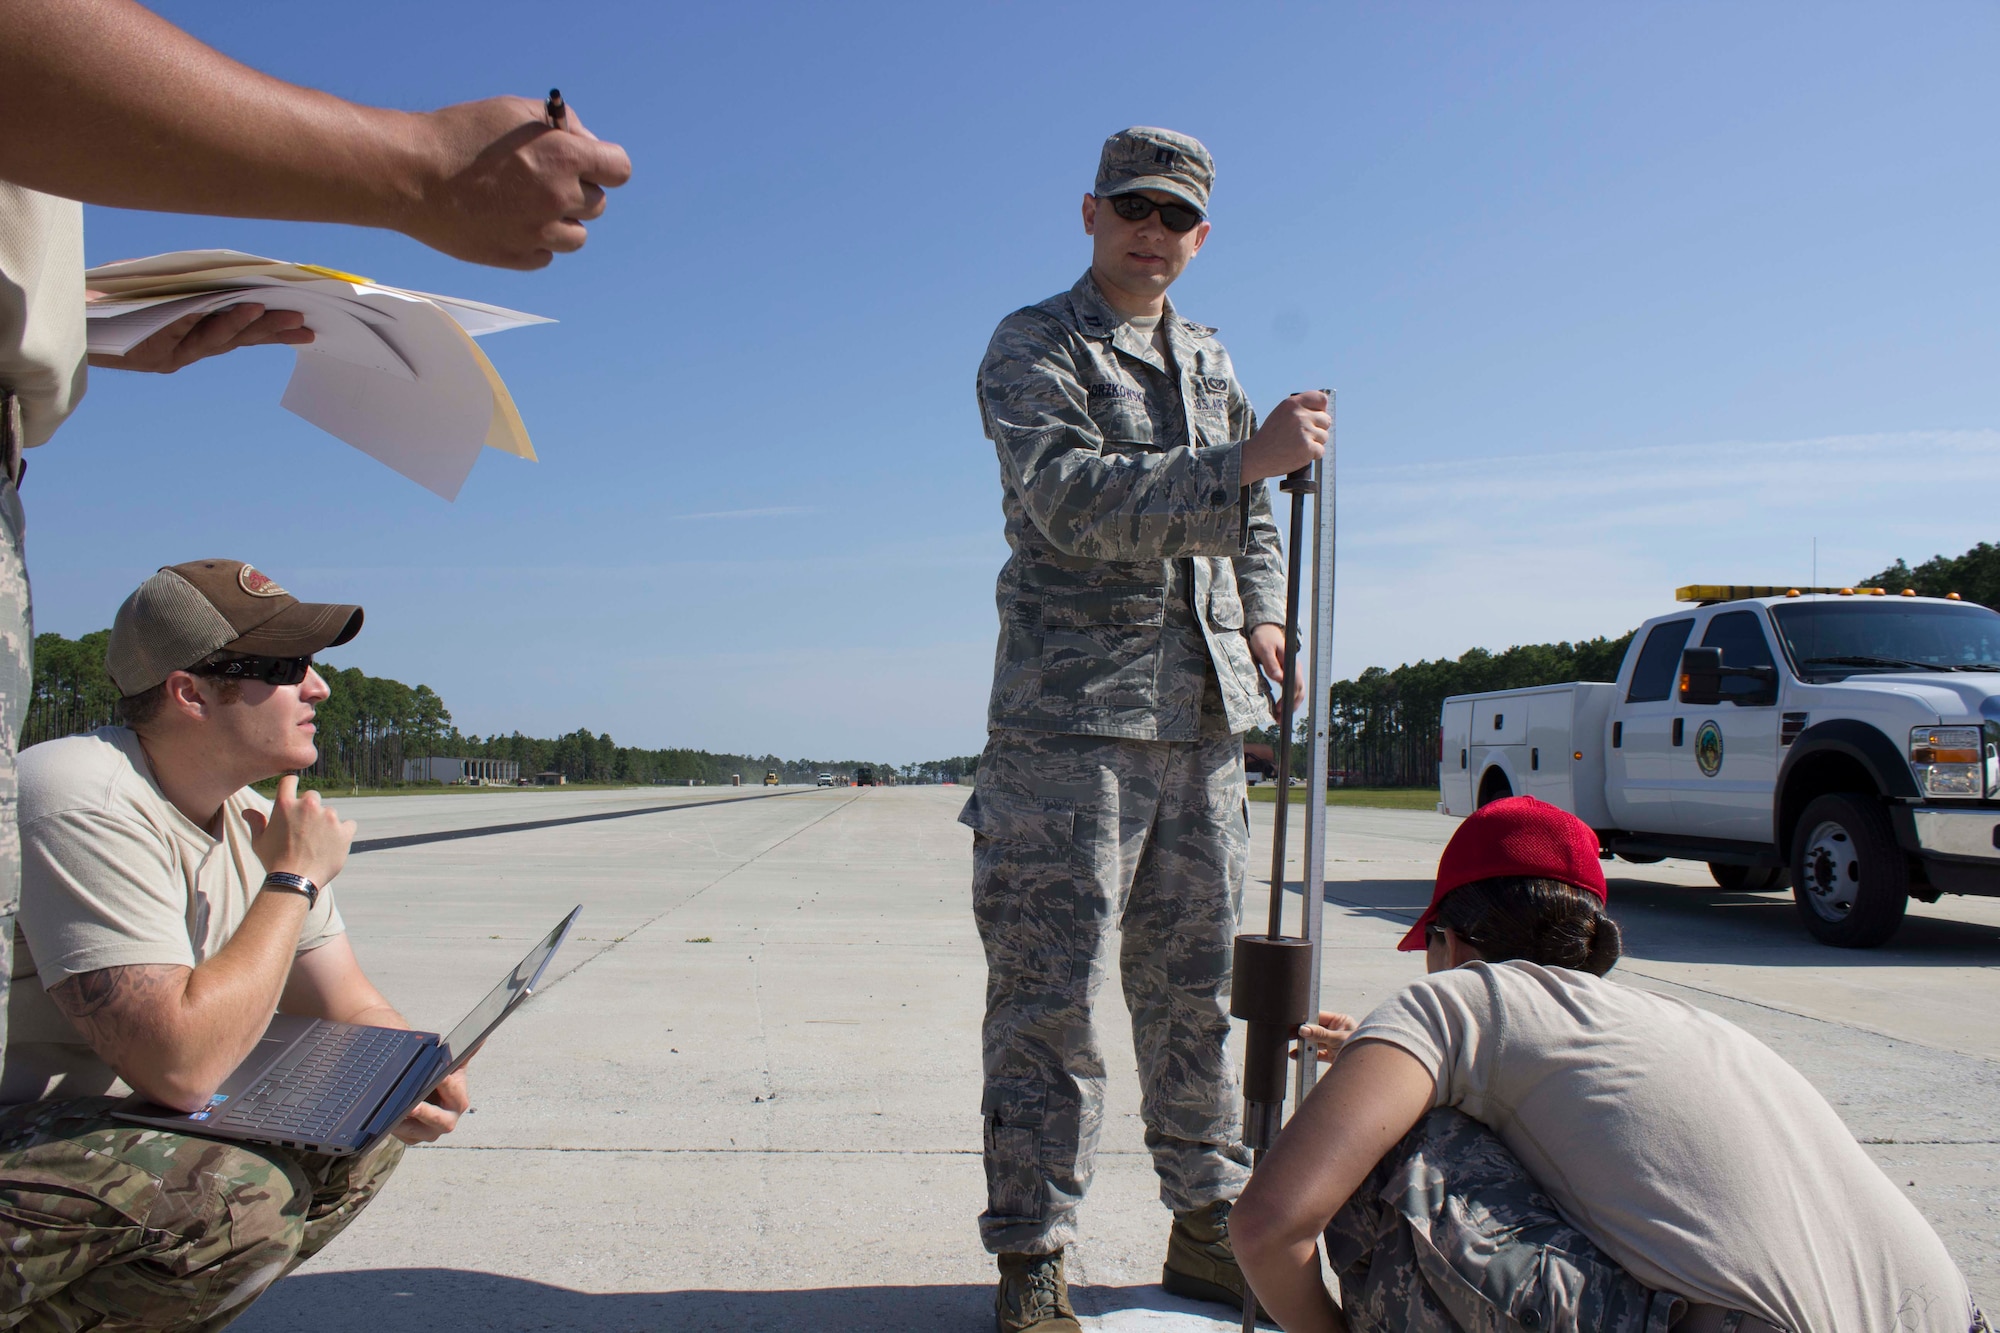 Joint force contingency airfield pavement evaluation students determine the strength of the soil beneath the airfield pavement using a Dynamic Cone Penetrometer during a field training day at the Silver Flag site at Tyndall Air Force Base, Florida. (U.S. Air Force Photo/Susan Lawson)